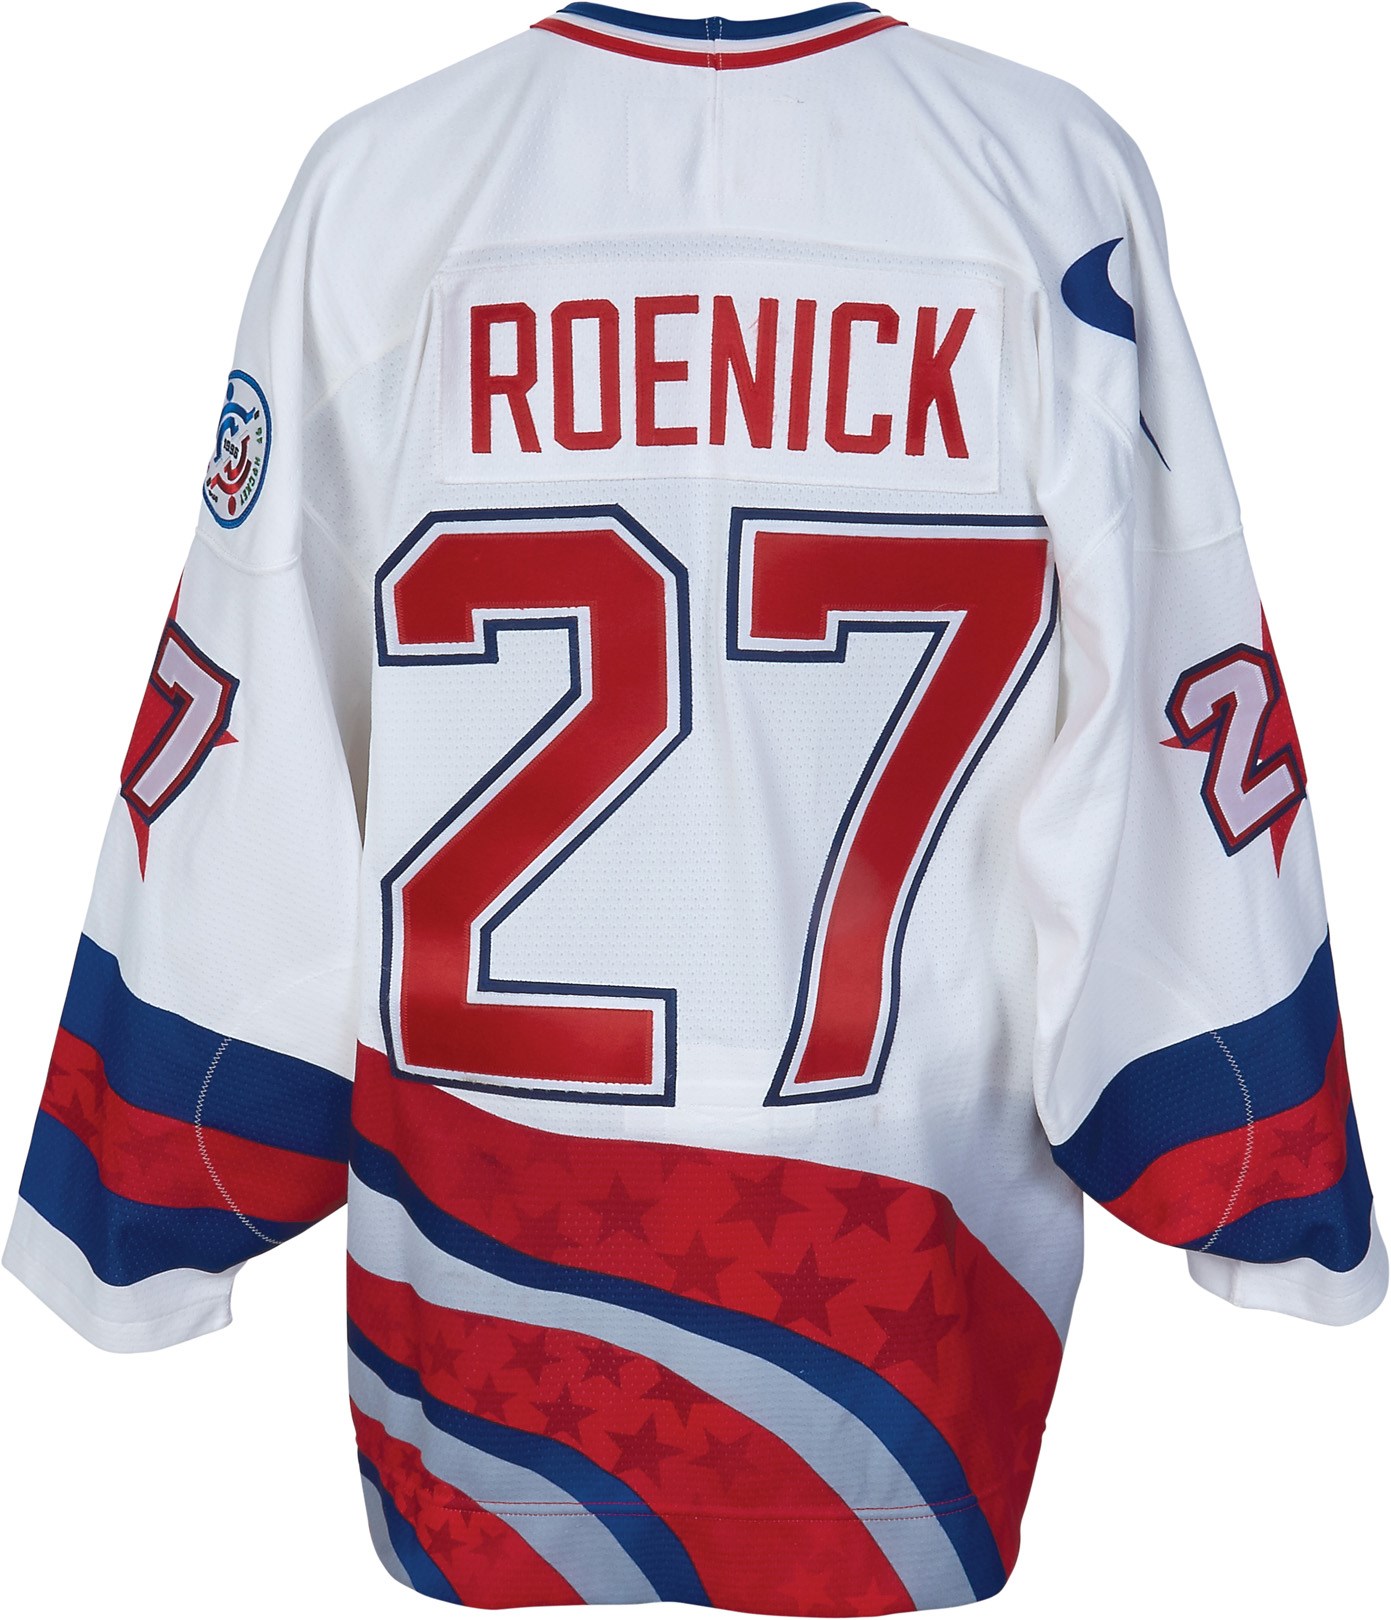 1996 Jeremy Roenick World Cup of Hockey Game Worn Jersey